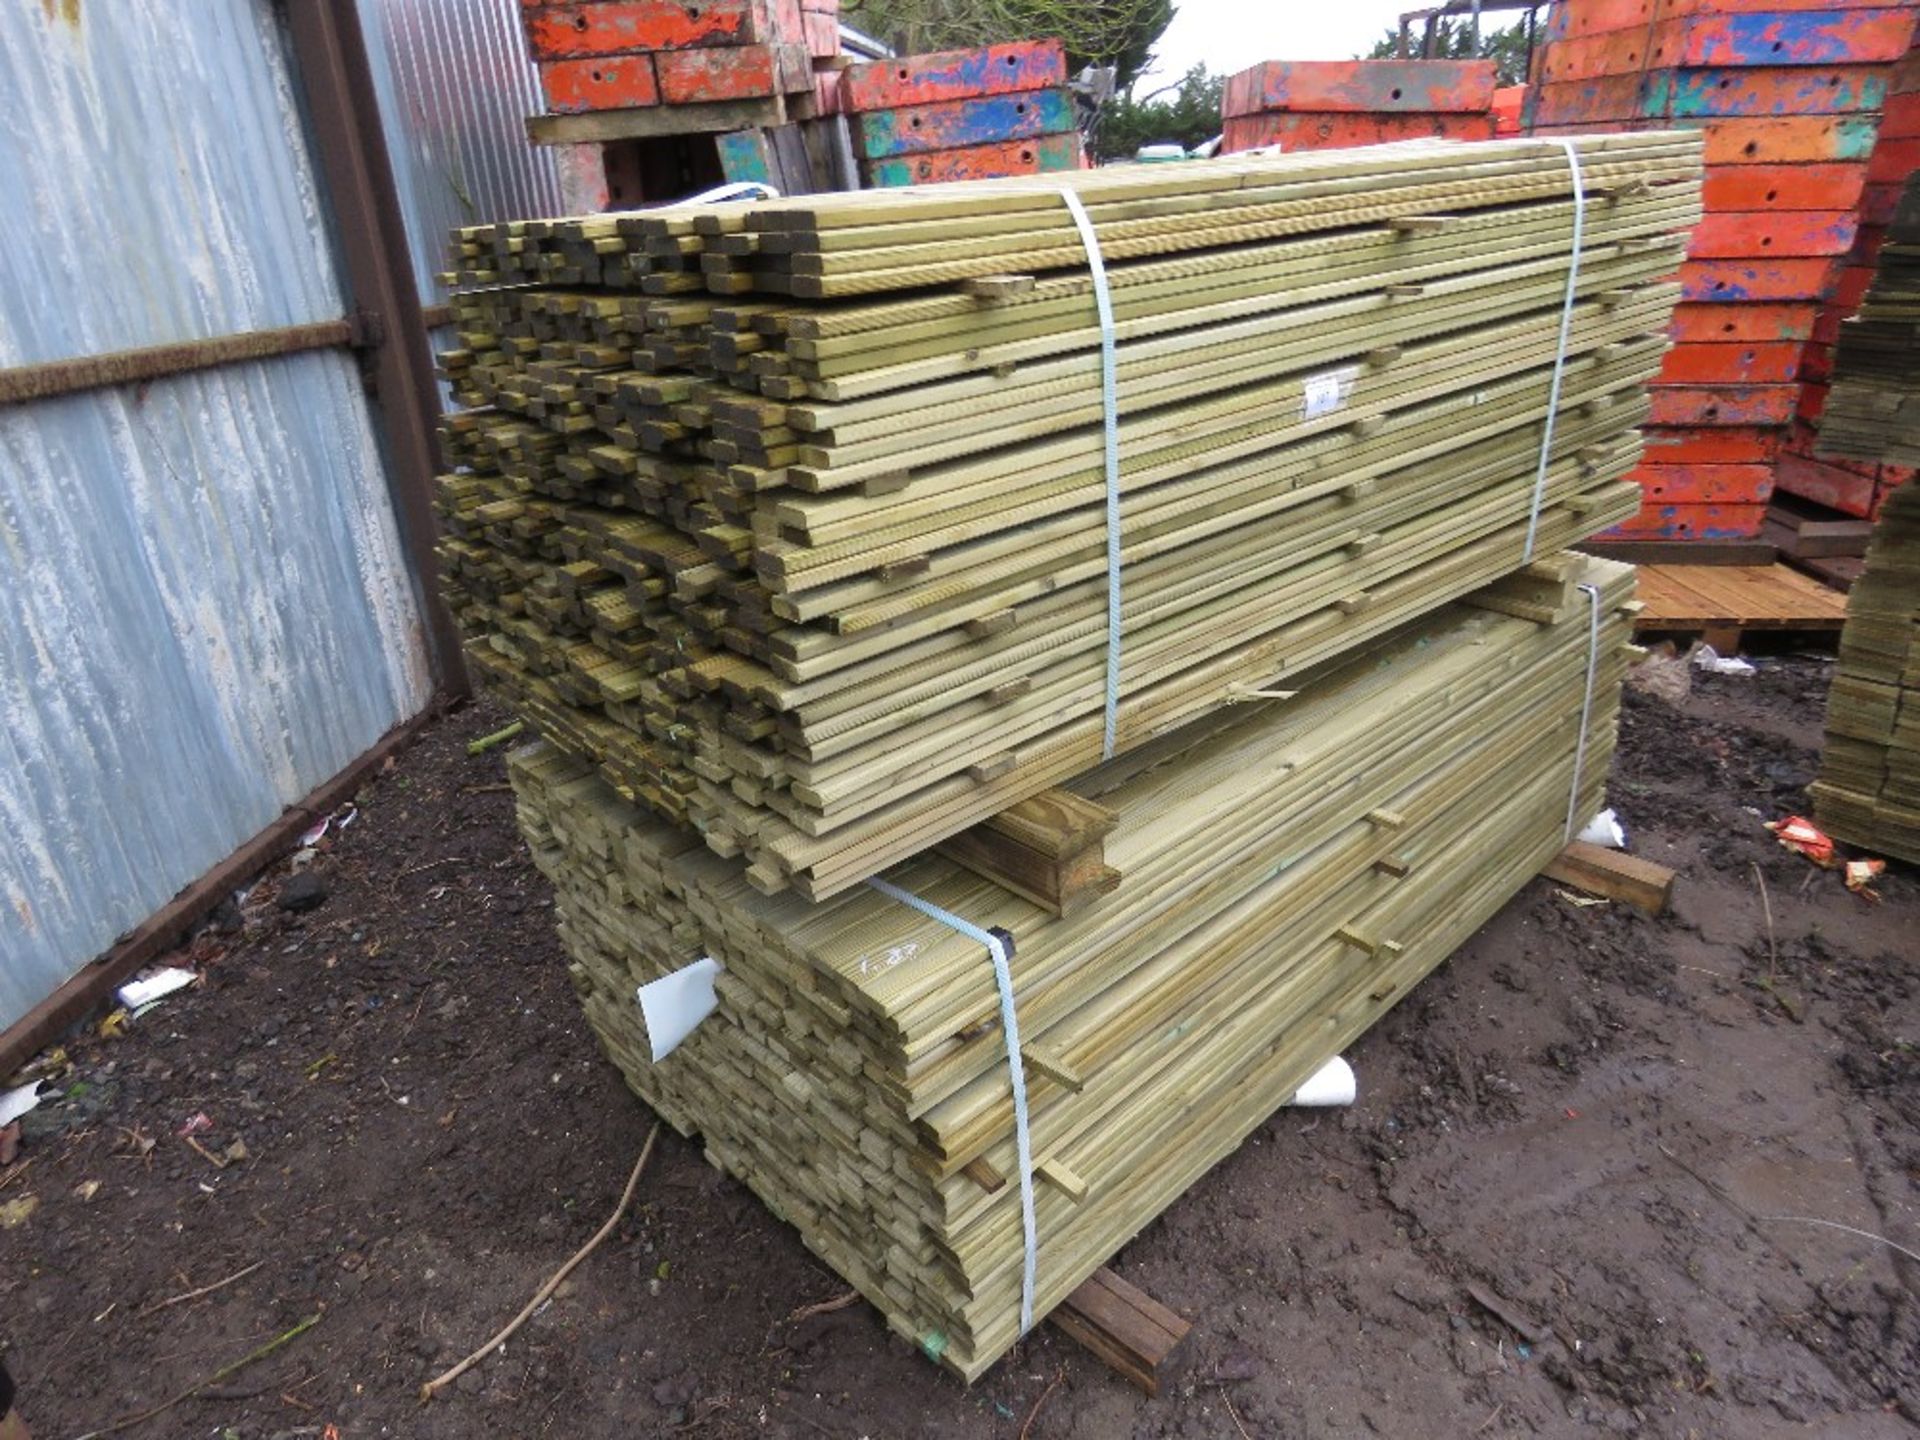 2 LARGE PACKS OF FENCING TIMBER/TRELLIS SLATS 1.83MX5CM APPROX.